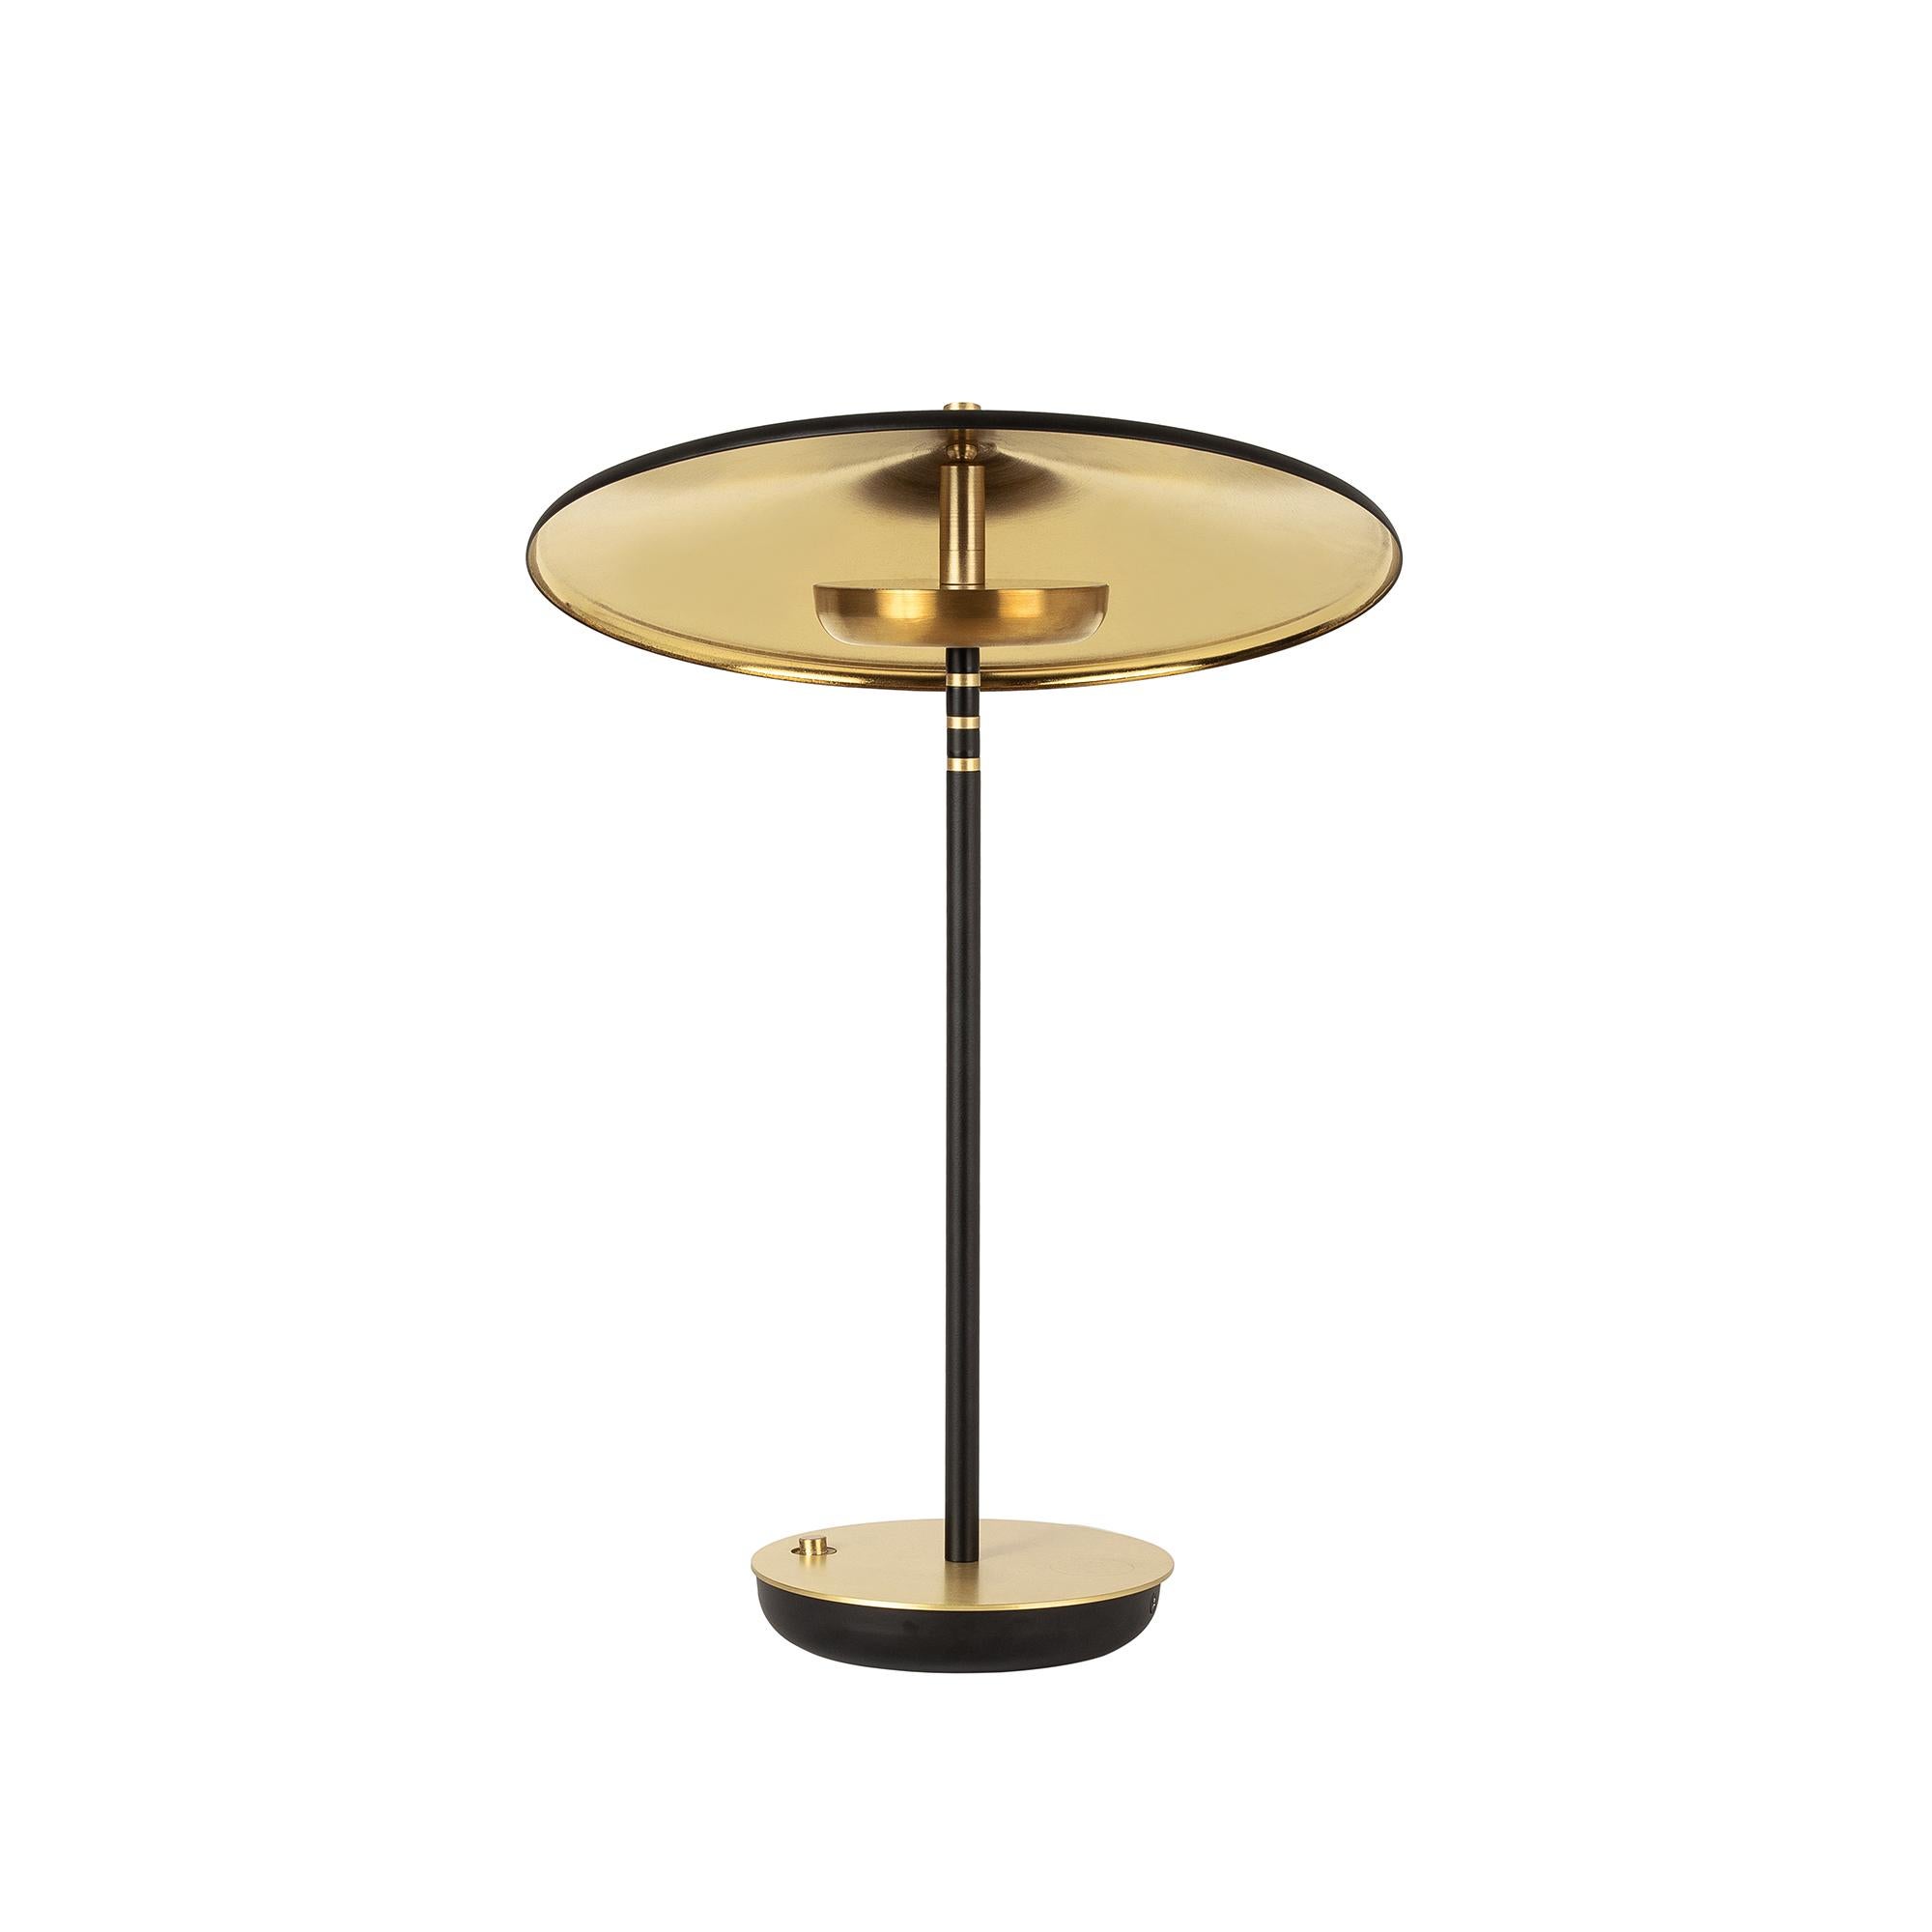 Brass Table Lamp with Tilting Shader, Black & Gold, Parisian Beret Desk Lamp In New Condition For Sale In Mugla, Bodrum